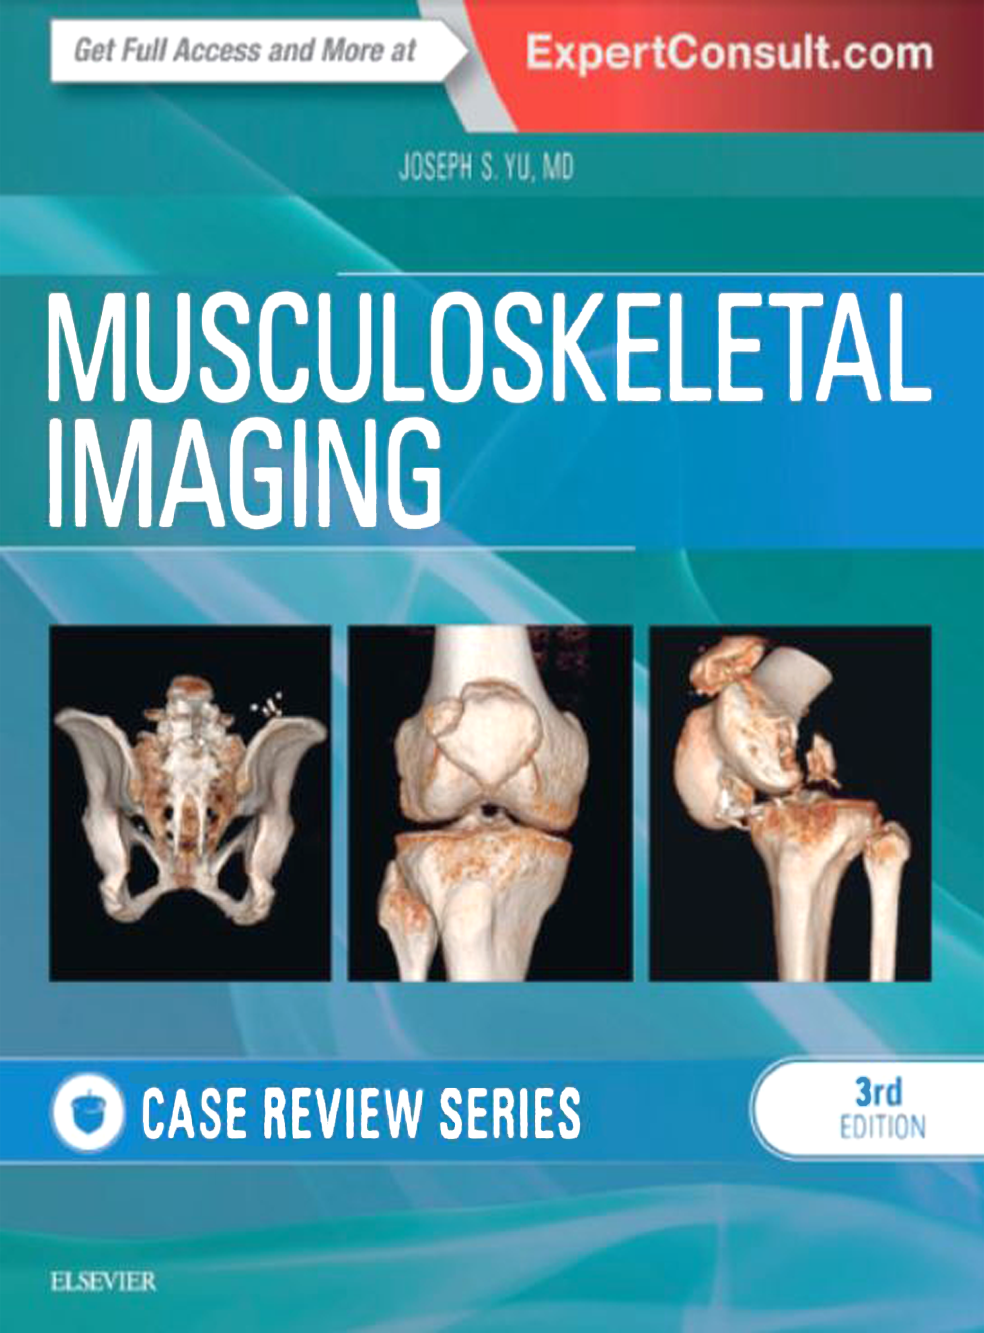 Musculoskeletal Imaging E Book And Test Scrubs Continuing Education®